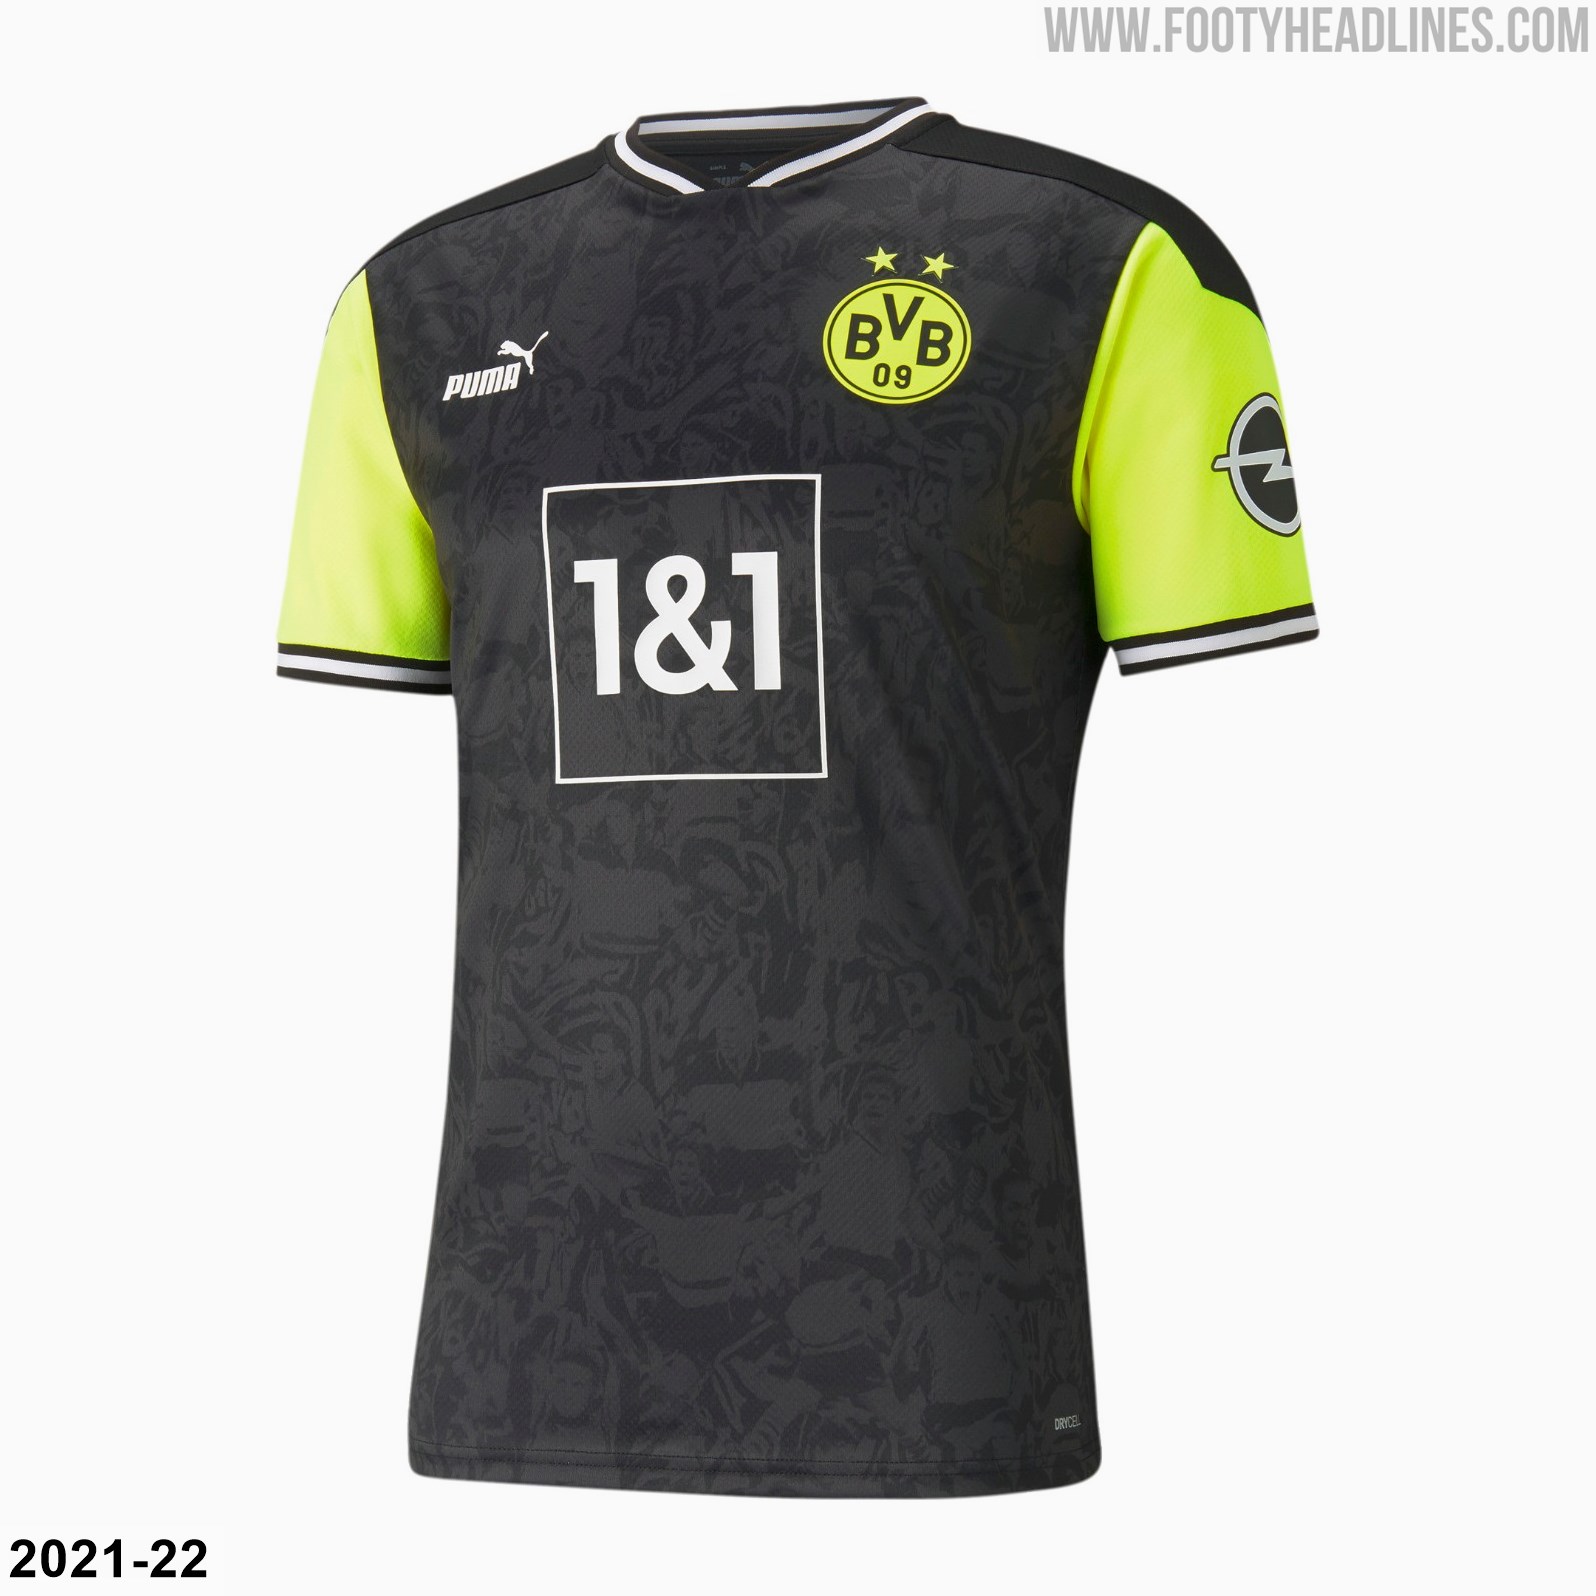 Dortmund to Release 23-24 Special-Edition Kit - Footy Headlines